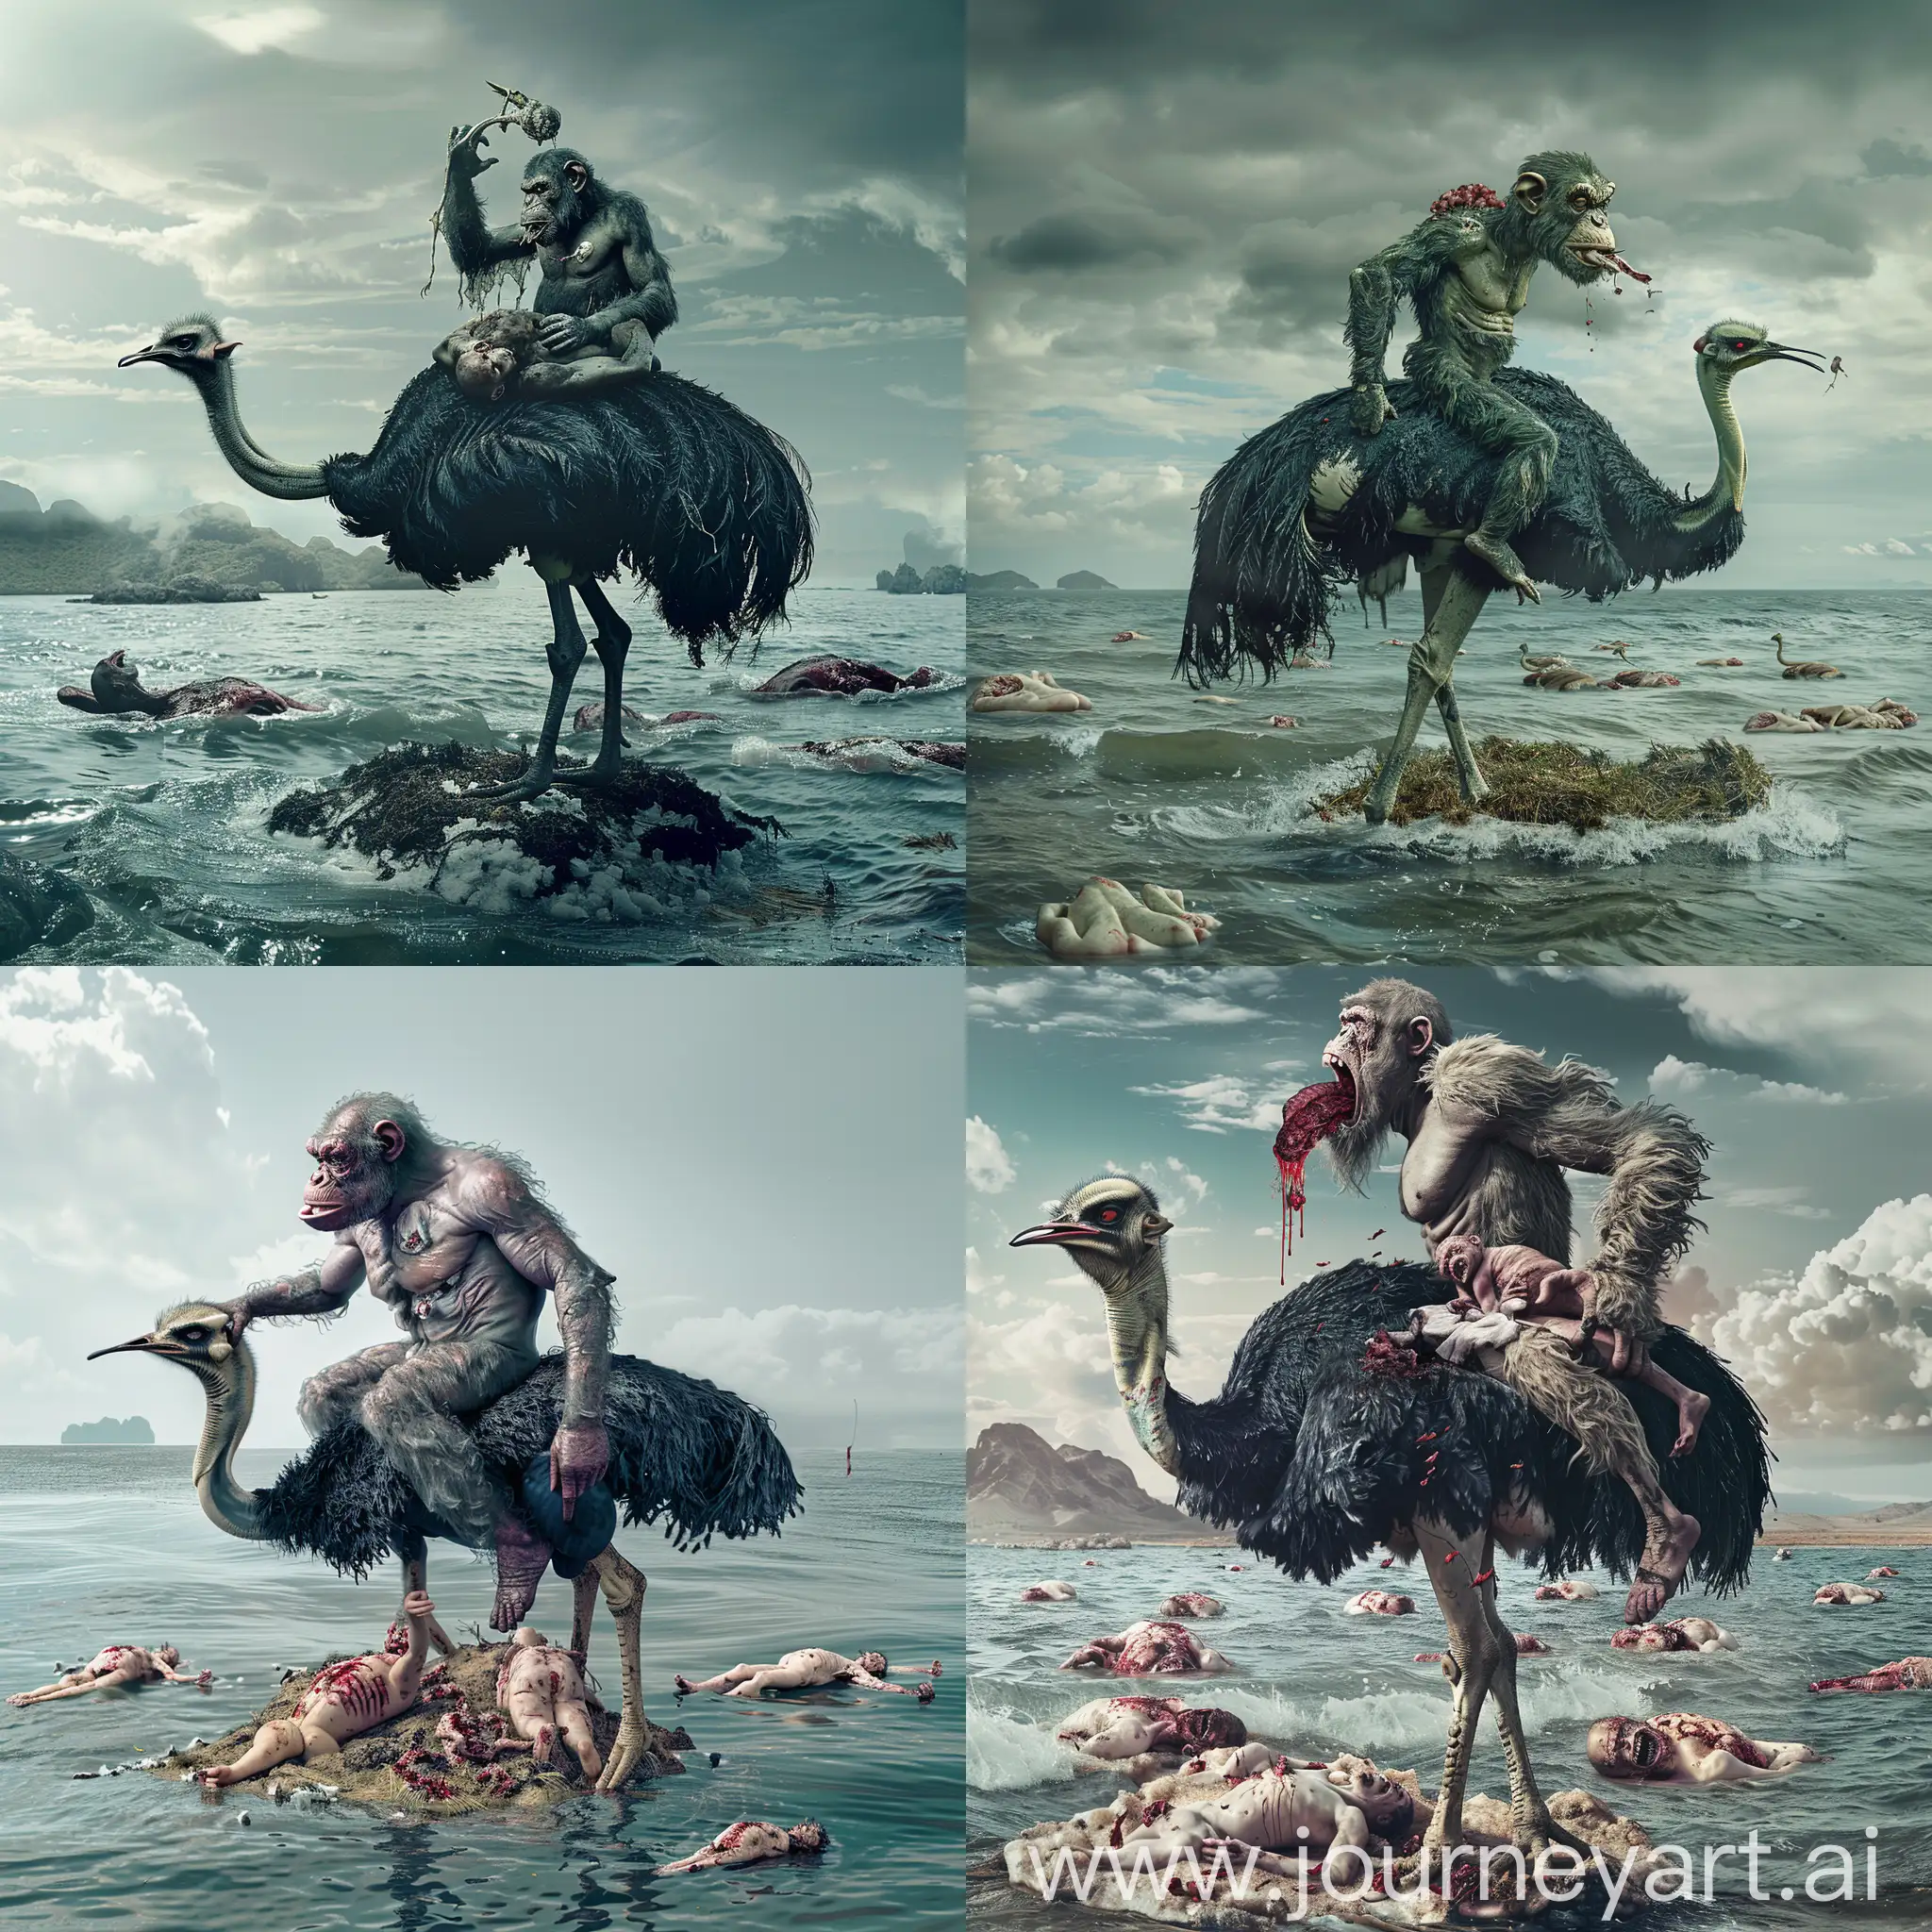 a half man half ape ride an ostrich,on an island in the sea,eating a human body,dead corps float on the sea,wide shot,realistic phtography,4k